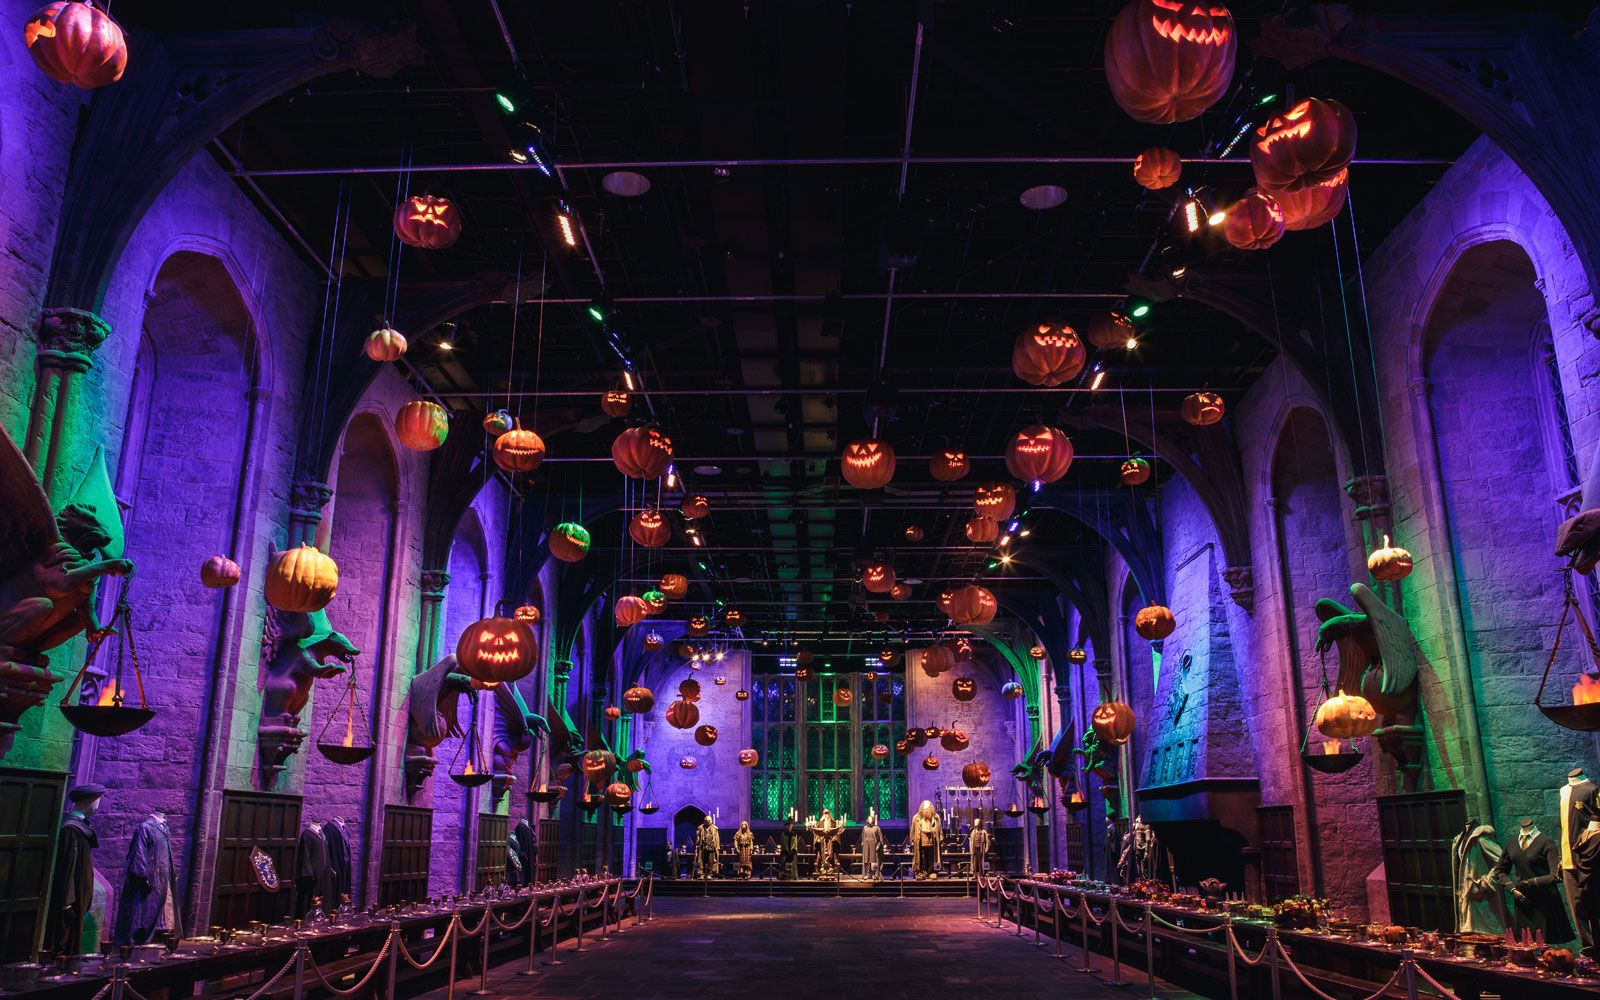 How To Have A Harry Potter Halloween At A Real Life Hogwarts. Travel + Leisure